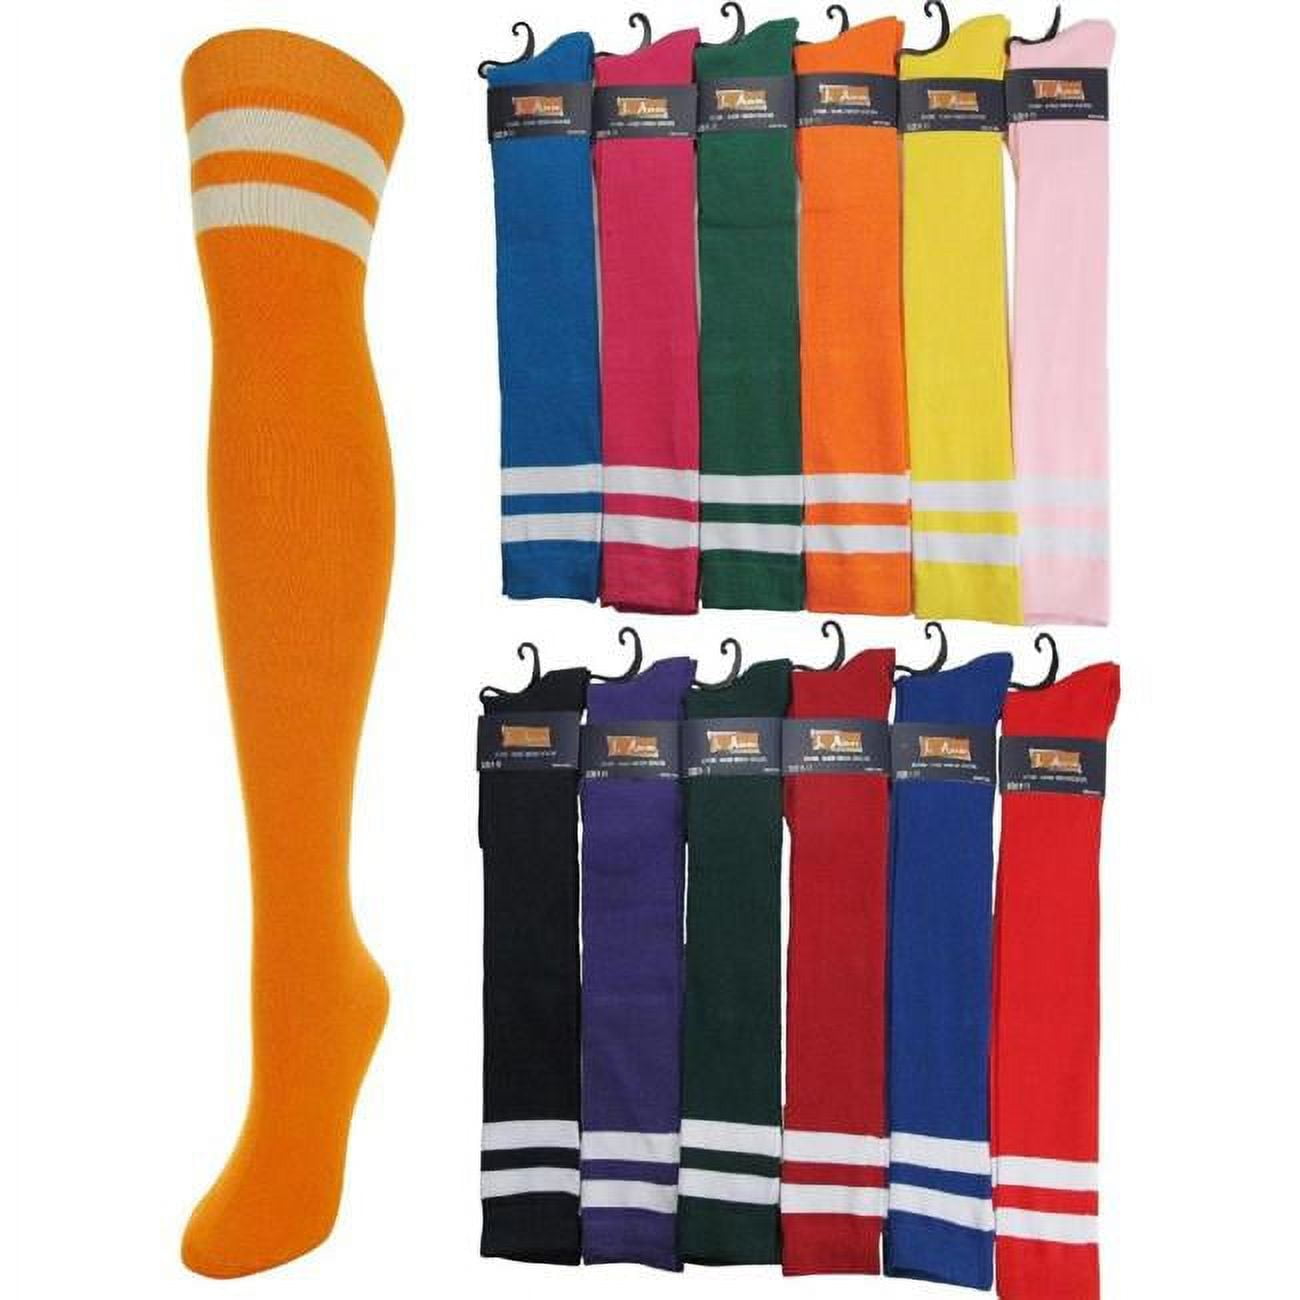 Picture of DDI 1867138 J. Ann Women&apos;s Over Knee High Socks-Assorted Color - Size 9-11 Case of 36